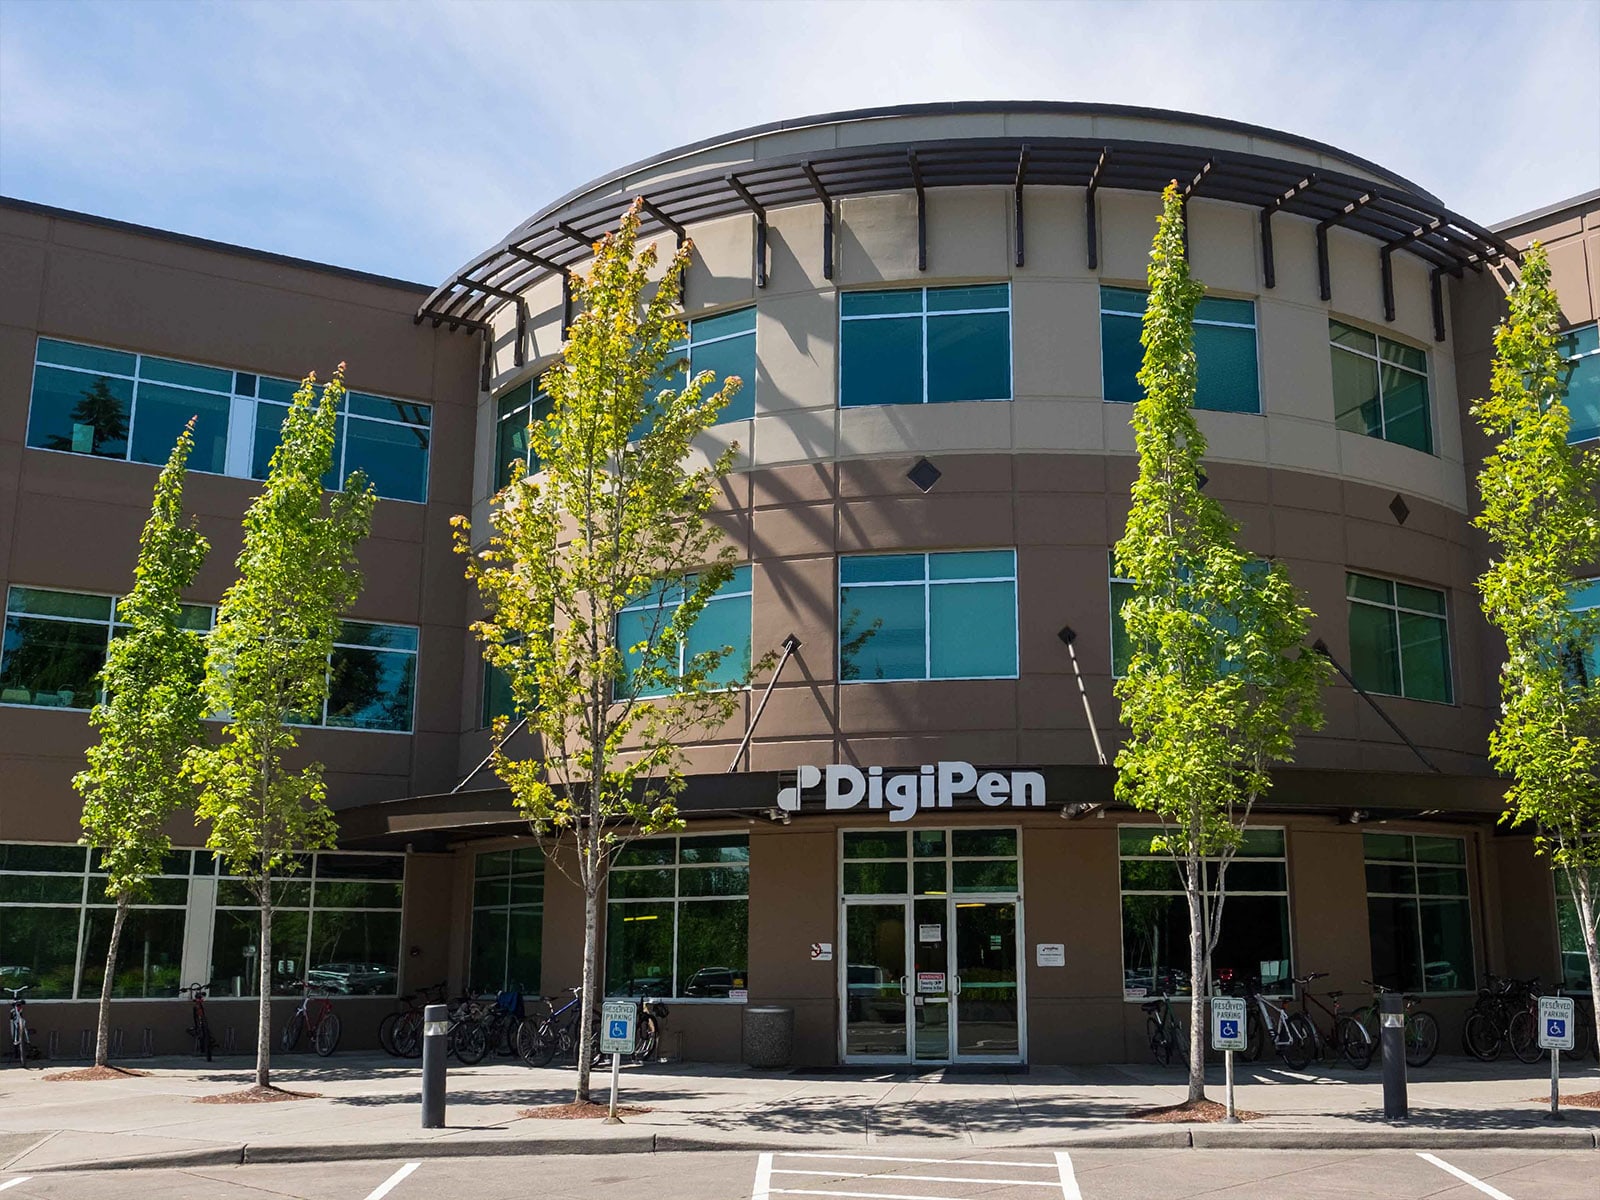 Photograph of the DigiPen building's main entrance taken at midday